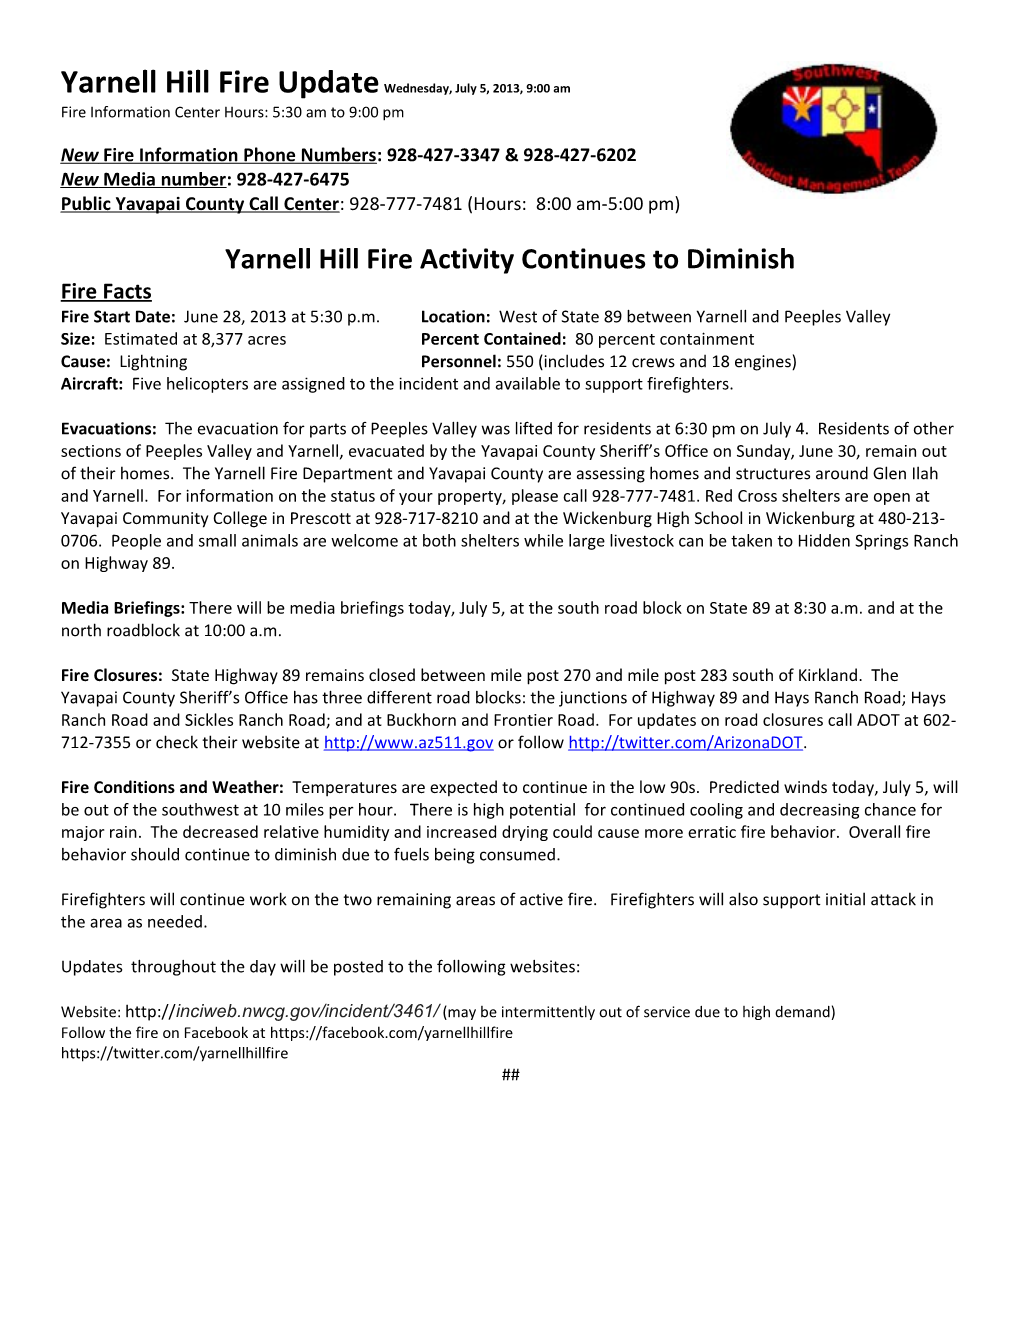 Yarnell Hill Fire Update Tuesday, July 2, 2013, 10:00 Pm